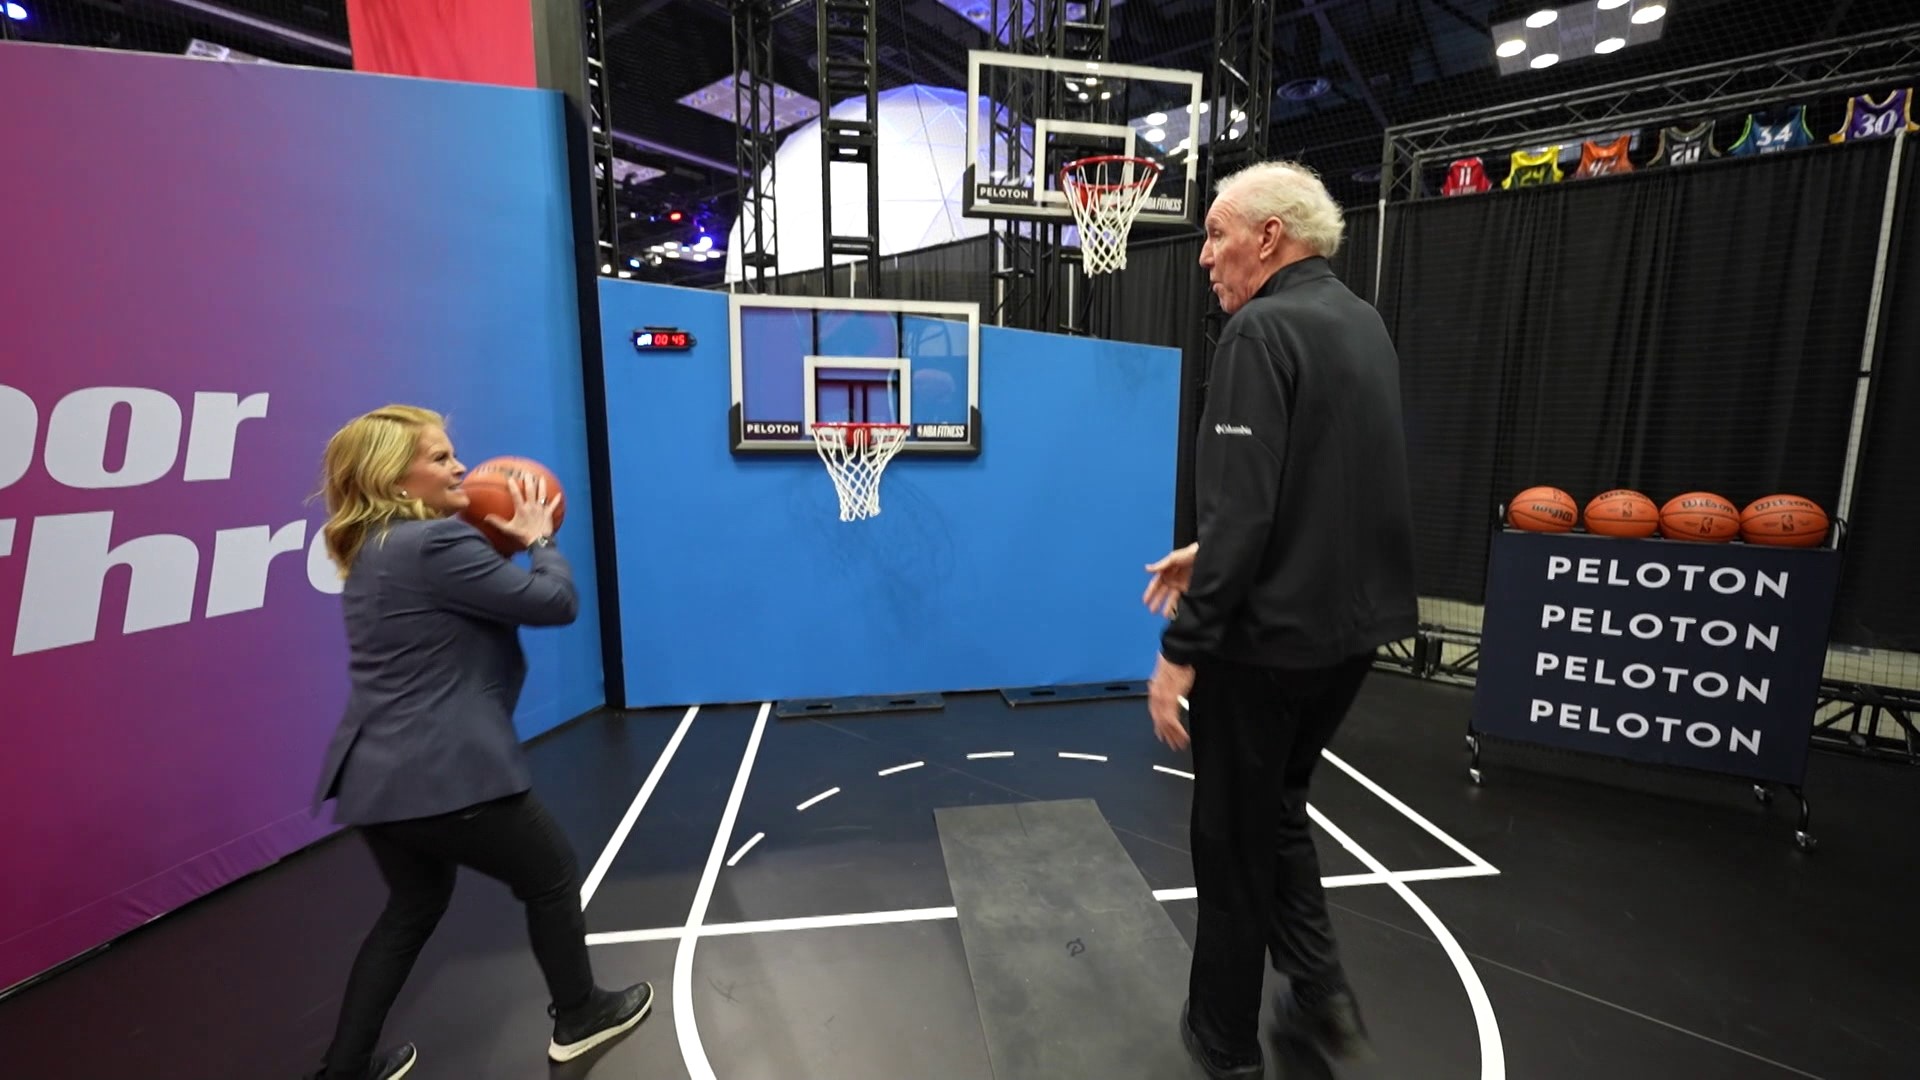 13News anchor Anne Marie Tiernon reports from the NBA Fitness exhibit at the NBA Crossover Experience at the Indiana Convention Center.